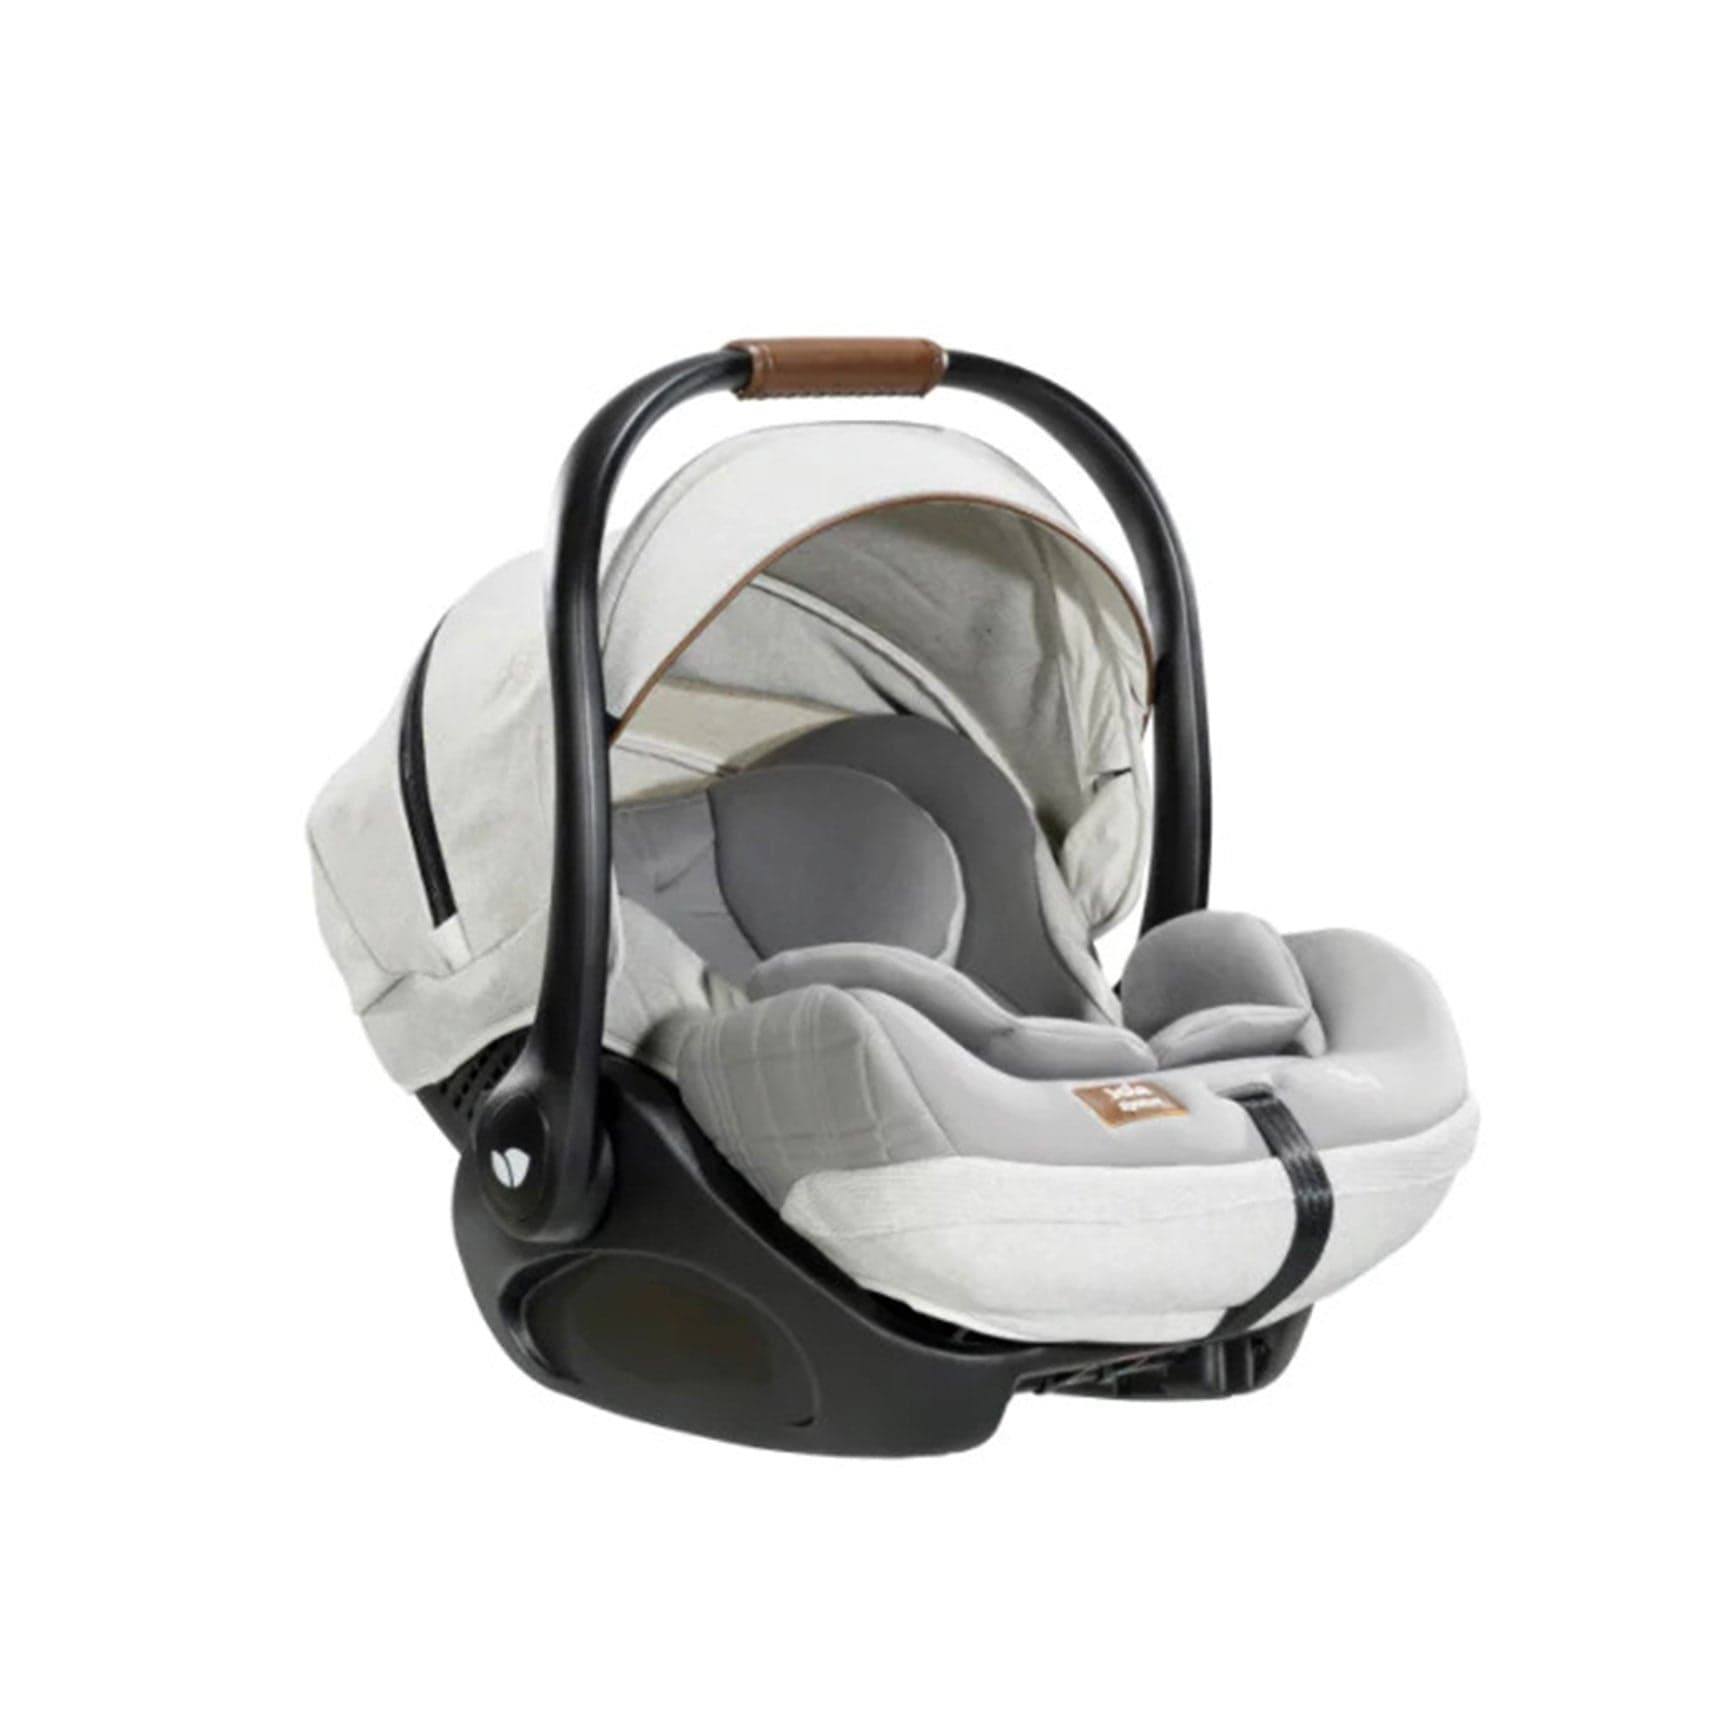 Joie baby car seats Joie i-Level Recline Signature Car Seat - Oyster C1510GAOYS000